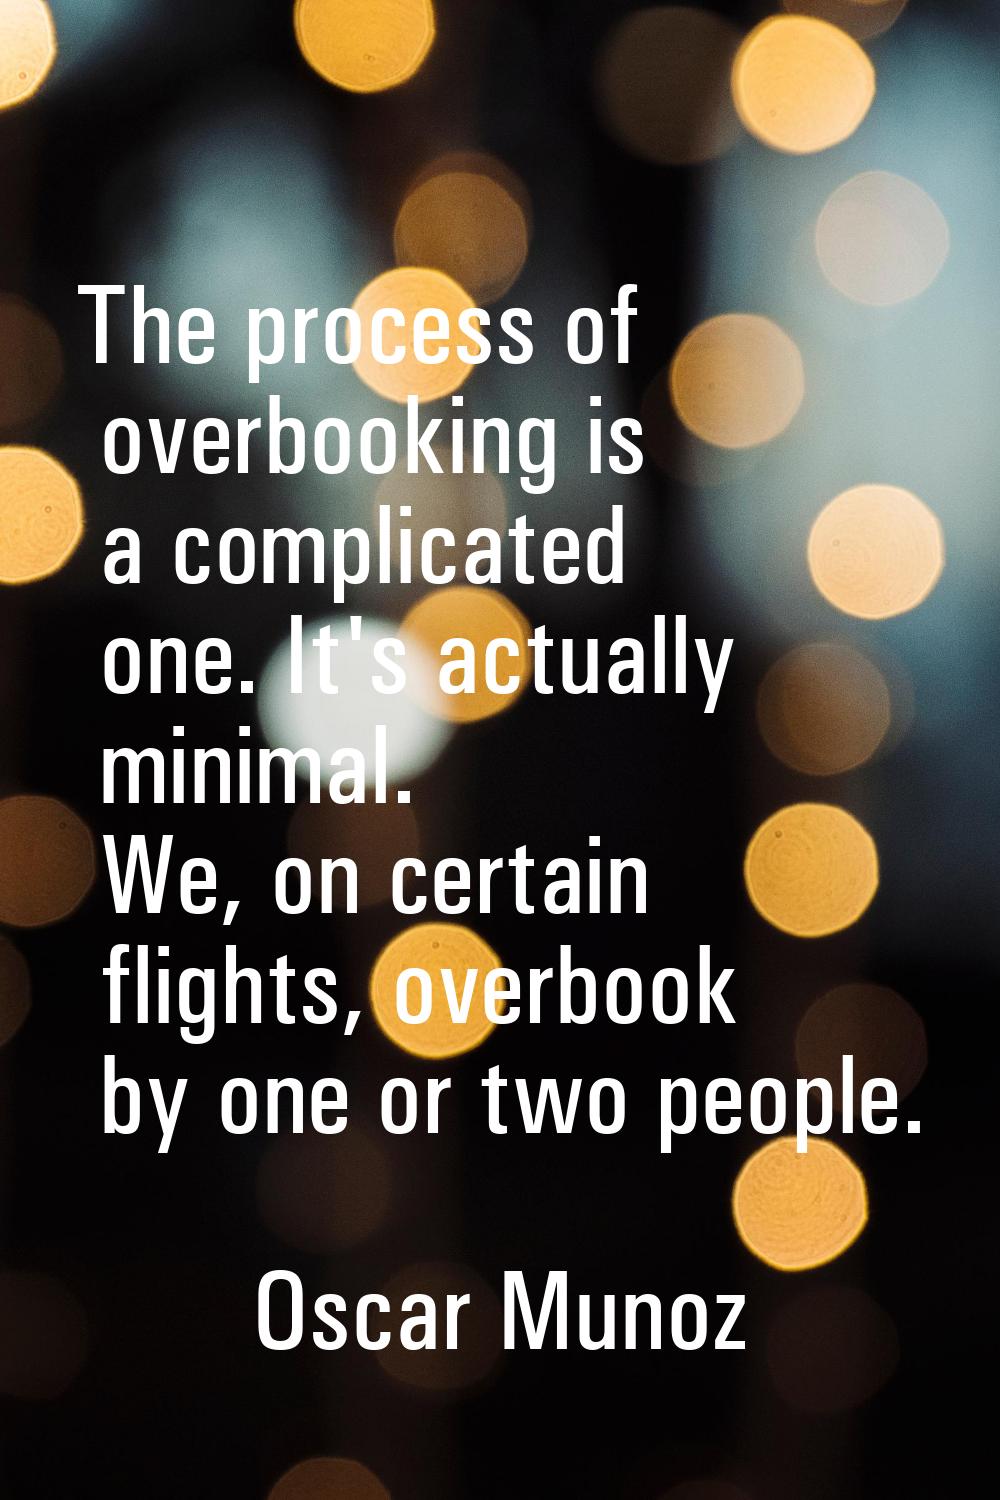 The process of overbooking is a complicated one. It's actually minimal. We, on certain flights, ove